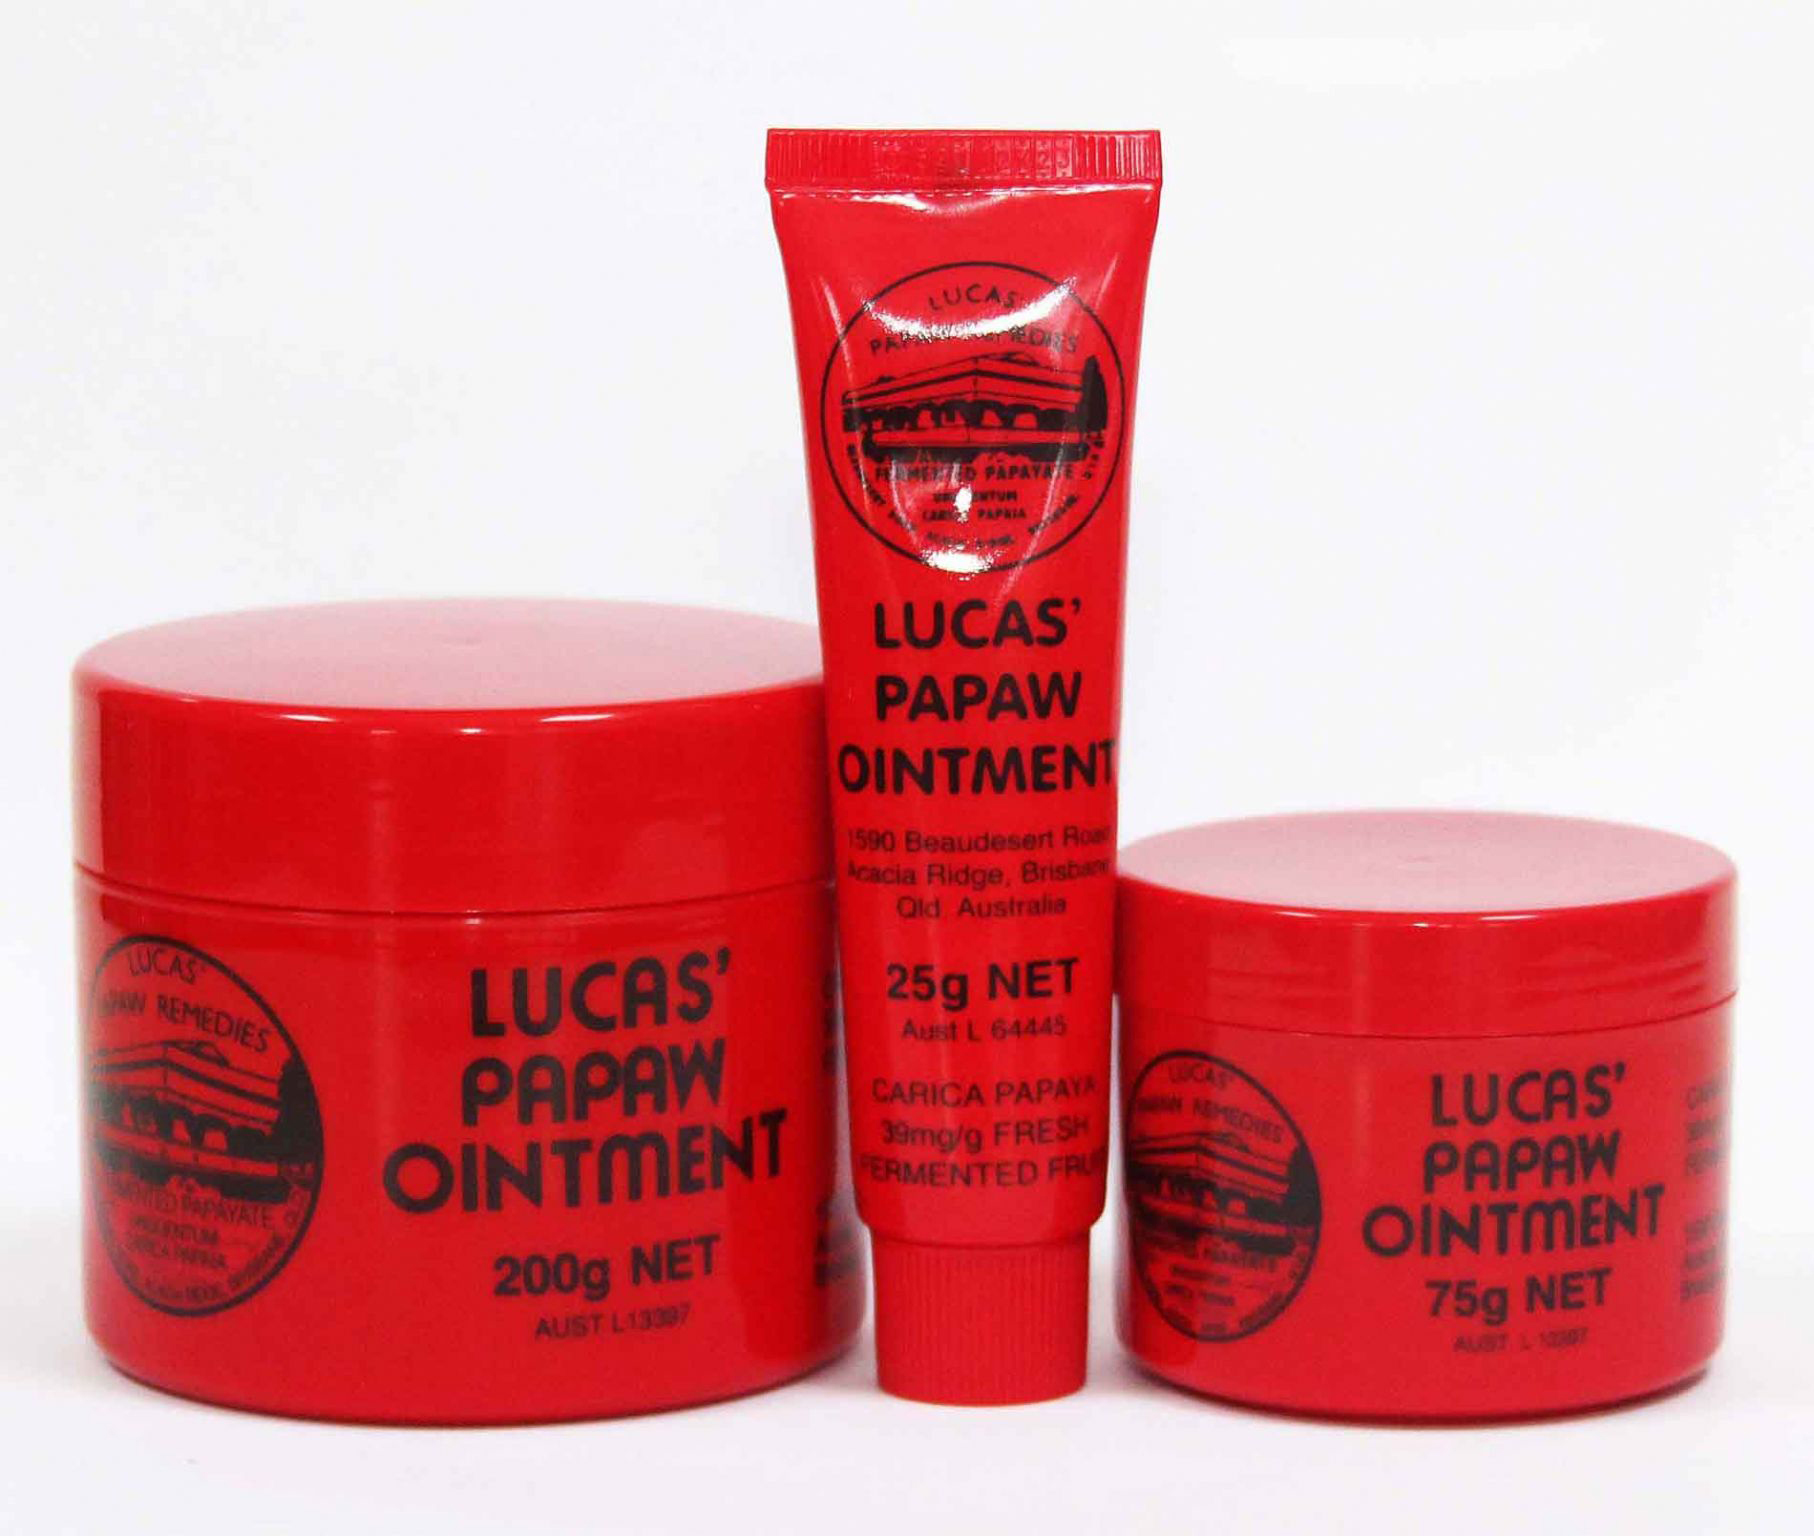 Lucas' Papaw Ointment  Therapeutic Goods Administration (TGA)